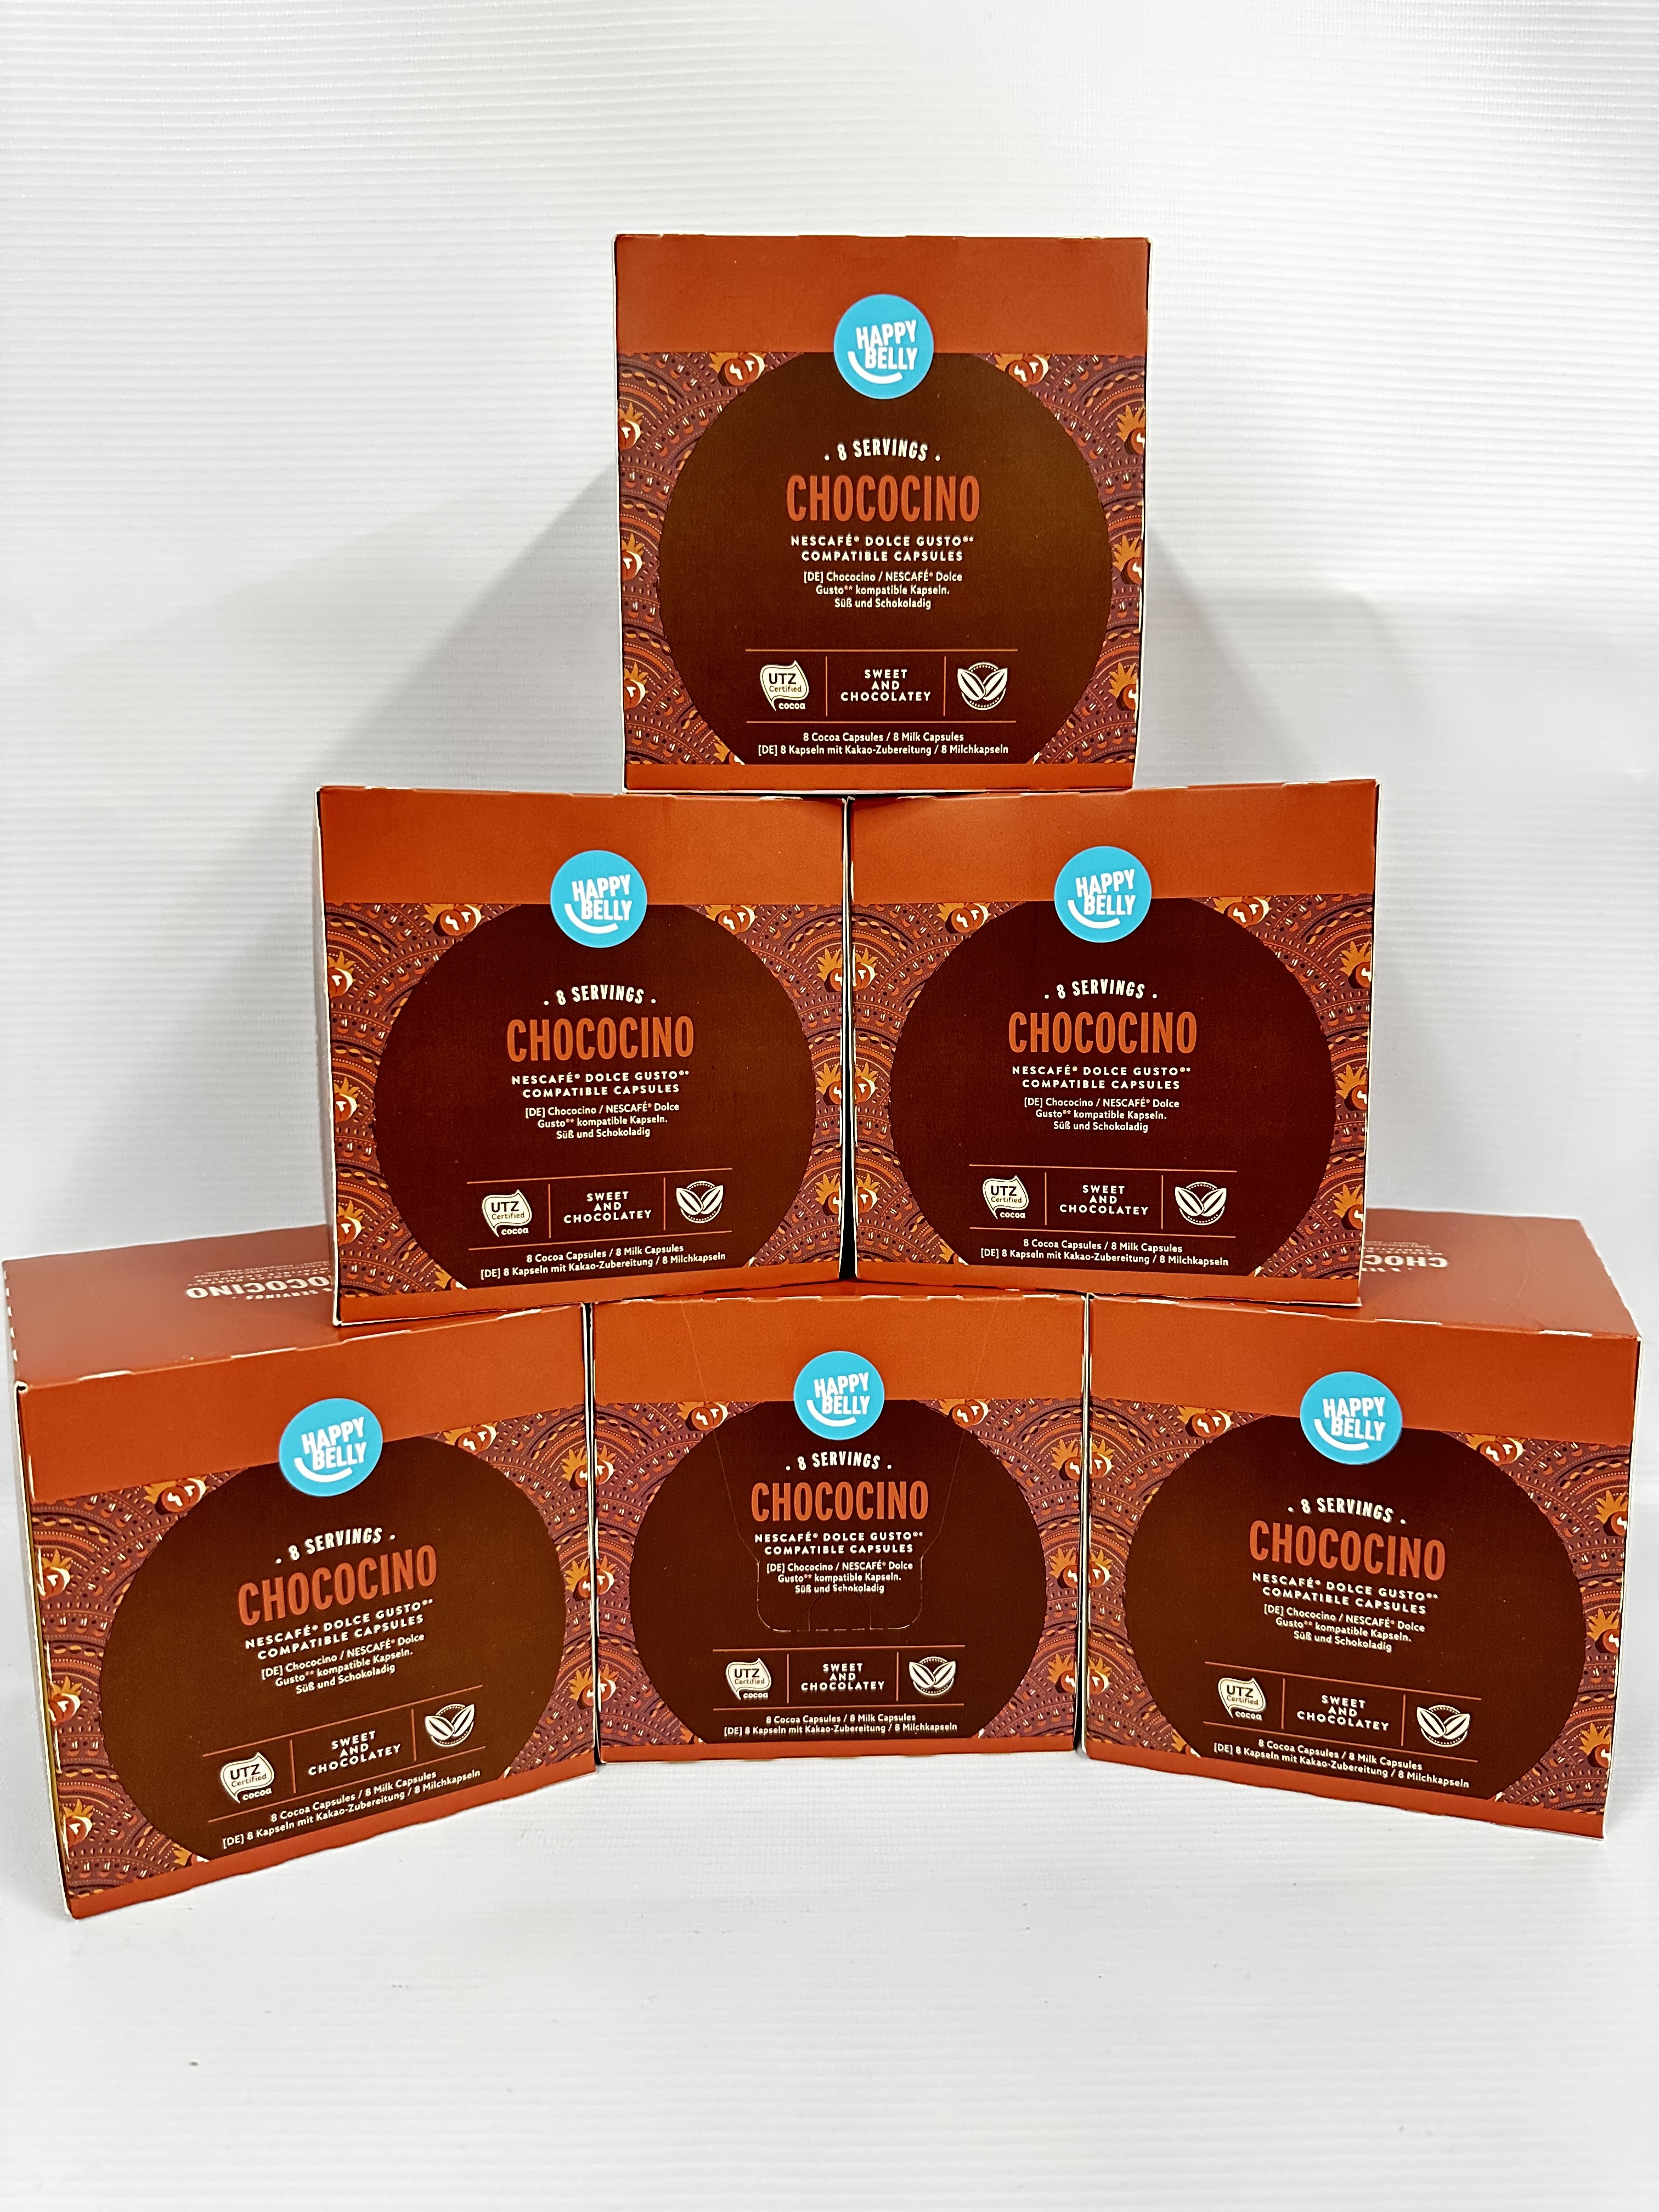 Nescafe Dolce Gusto Chococino 8 per pack - Pack of 6